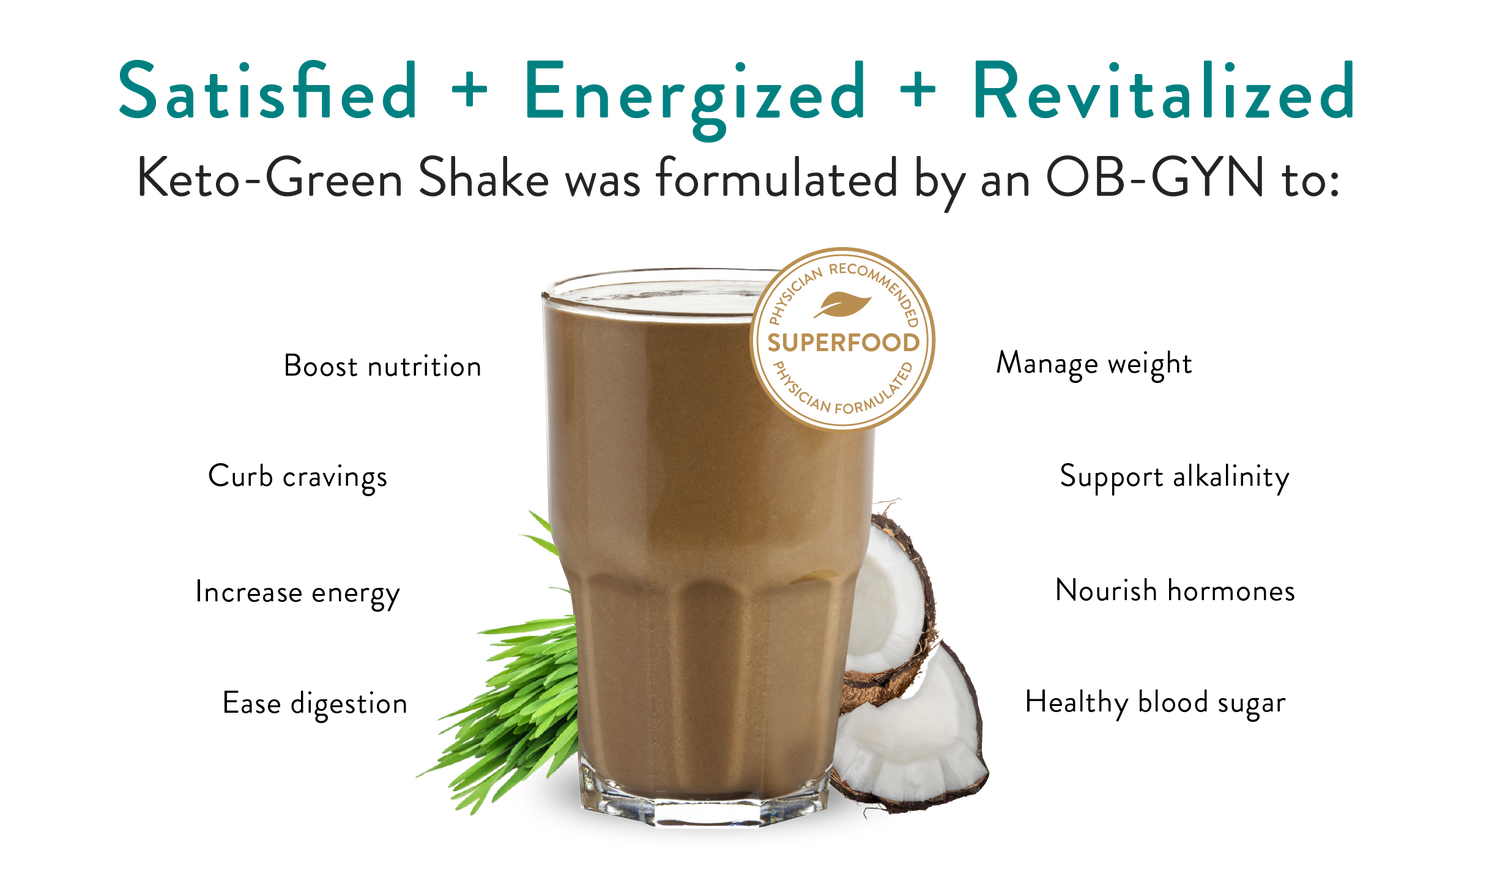 Satisfied + Energized + Revitalized. Keto-Green Shake was formulated by an OB-GYN to: Boost nutrition. Curb cravings. Increase energy. Esae digestion. Manage weight. Support alkalinity. Nourish hormones. Healthy blood sugar